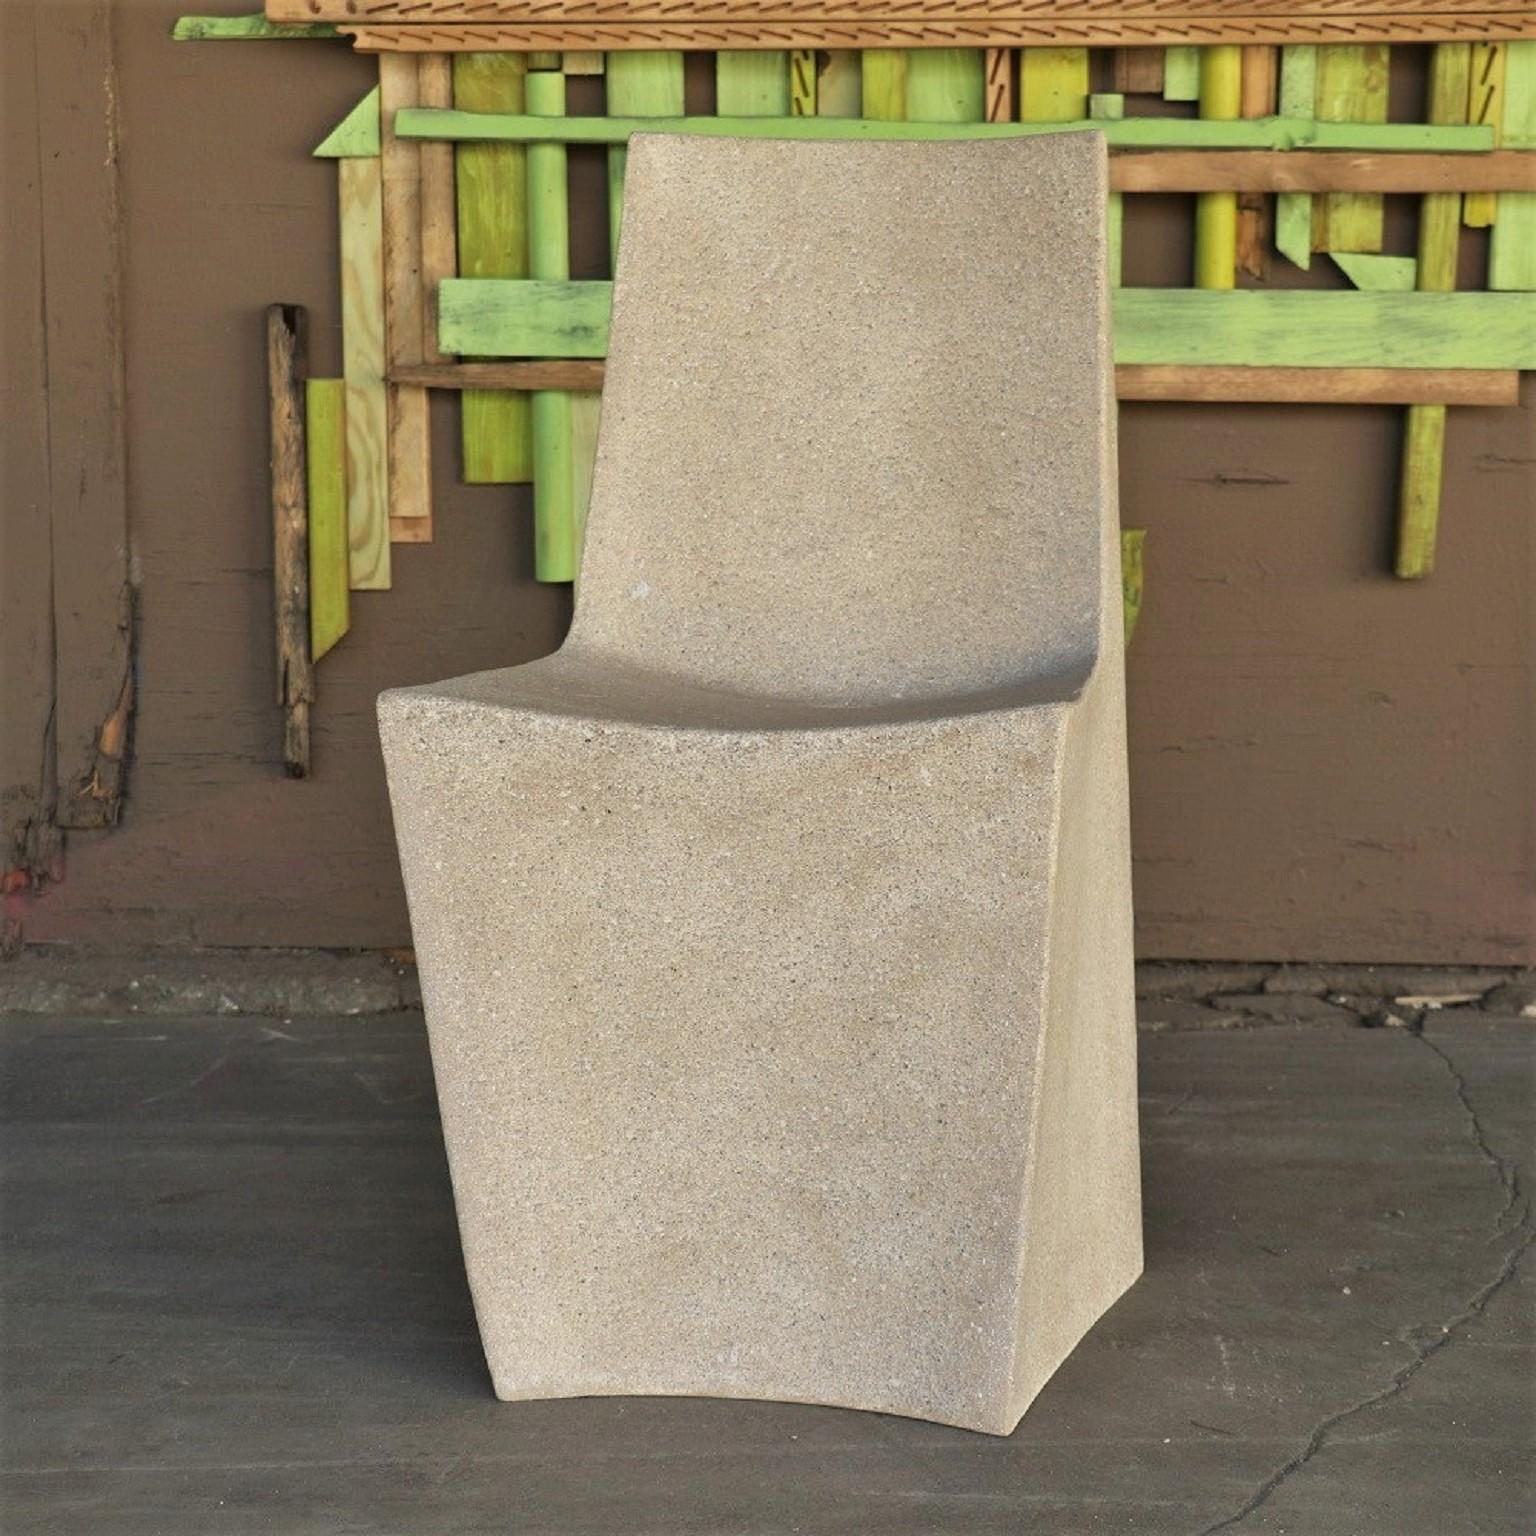 Classic longevity. Surprising comfort.

Dimensions: Width 17 in. (43.2 cm), depth 20 in. (50.8 cm), height 33 in. (83.8 cm). Weight 35 lbs. (15.8 kg)
No assembly required.

Finish color options:
white stone
natural stone 
aged stone (shown)
key